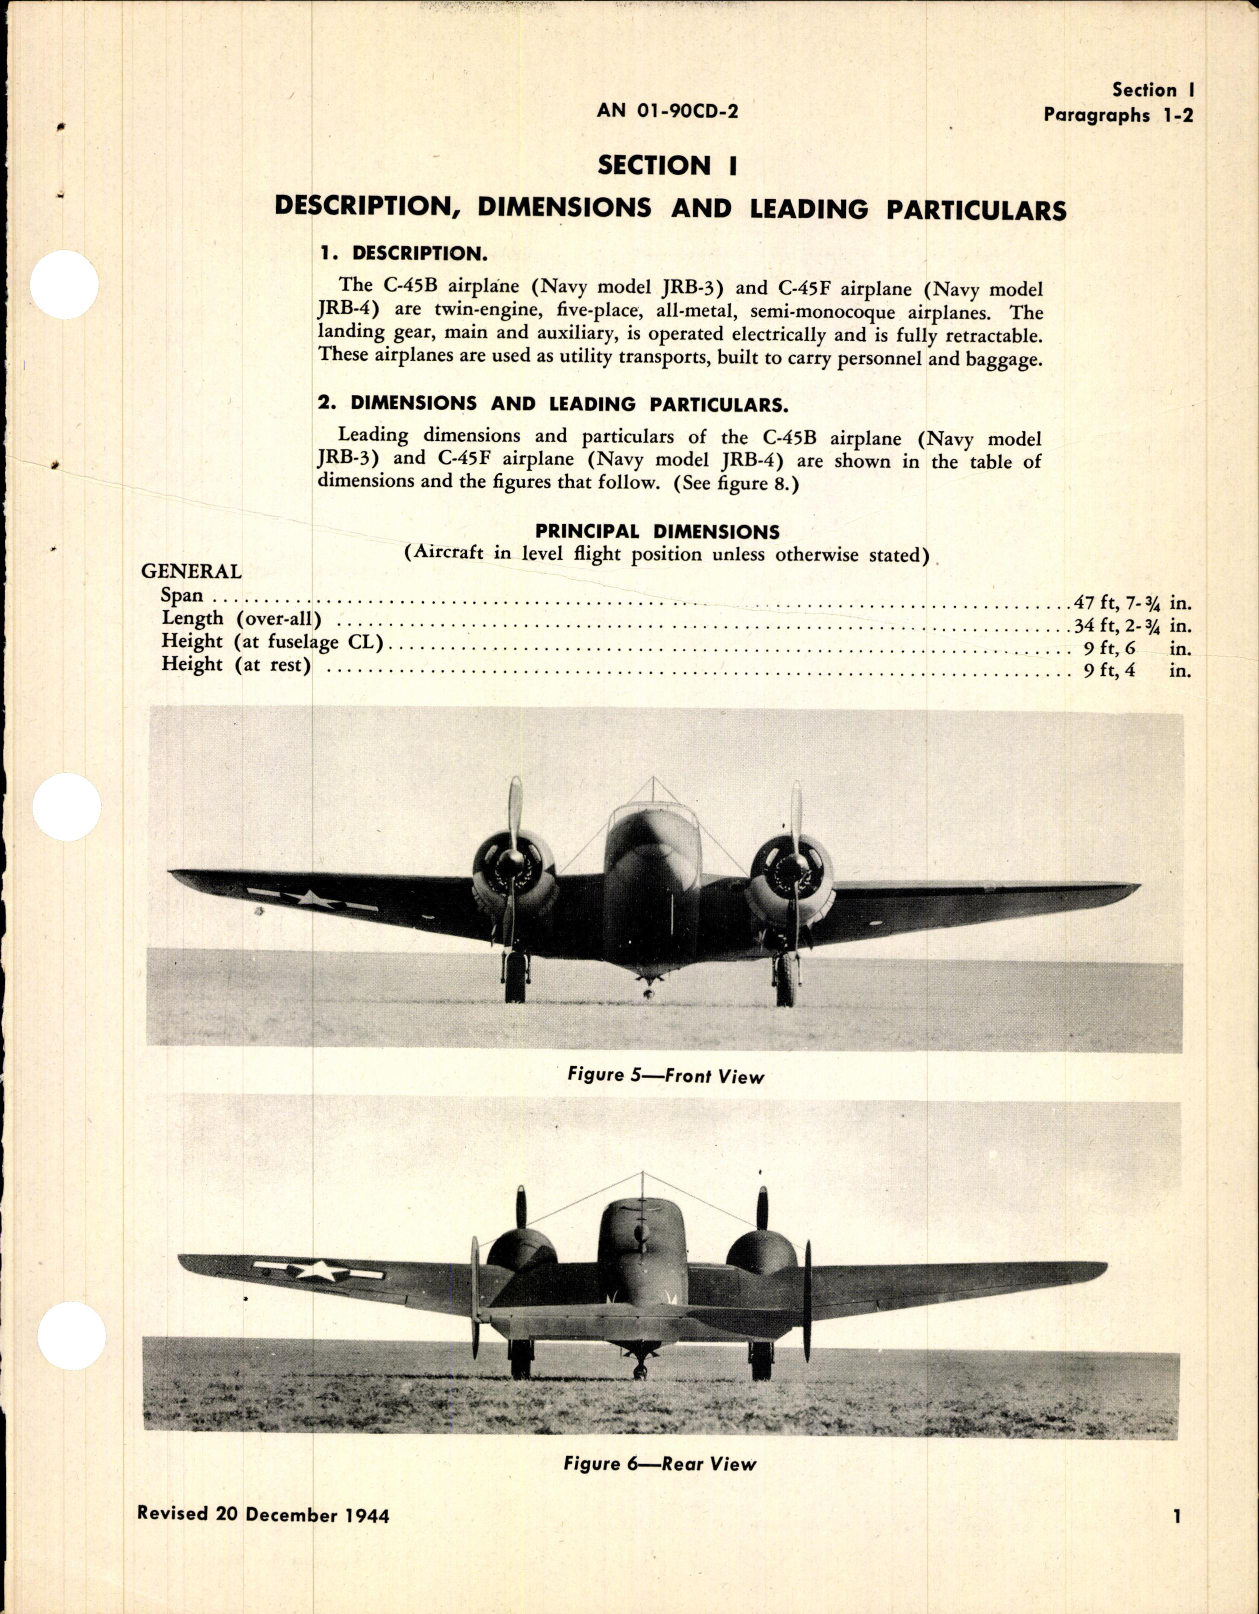 Sample page 5 from AirCorps Library document: Service and Maintenance Instructions for C-45B, C-45F, JRB-3 and JRB-4